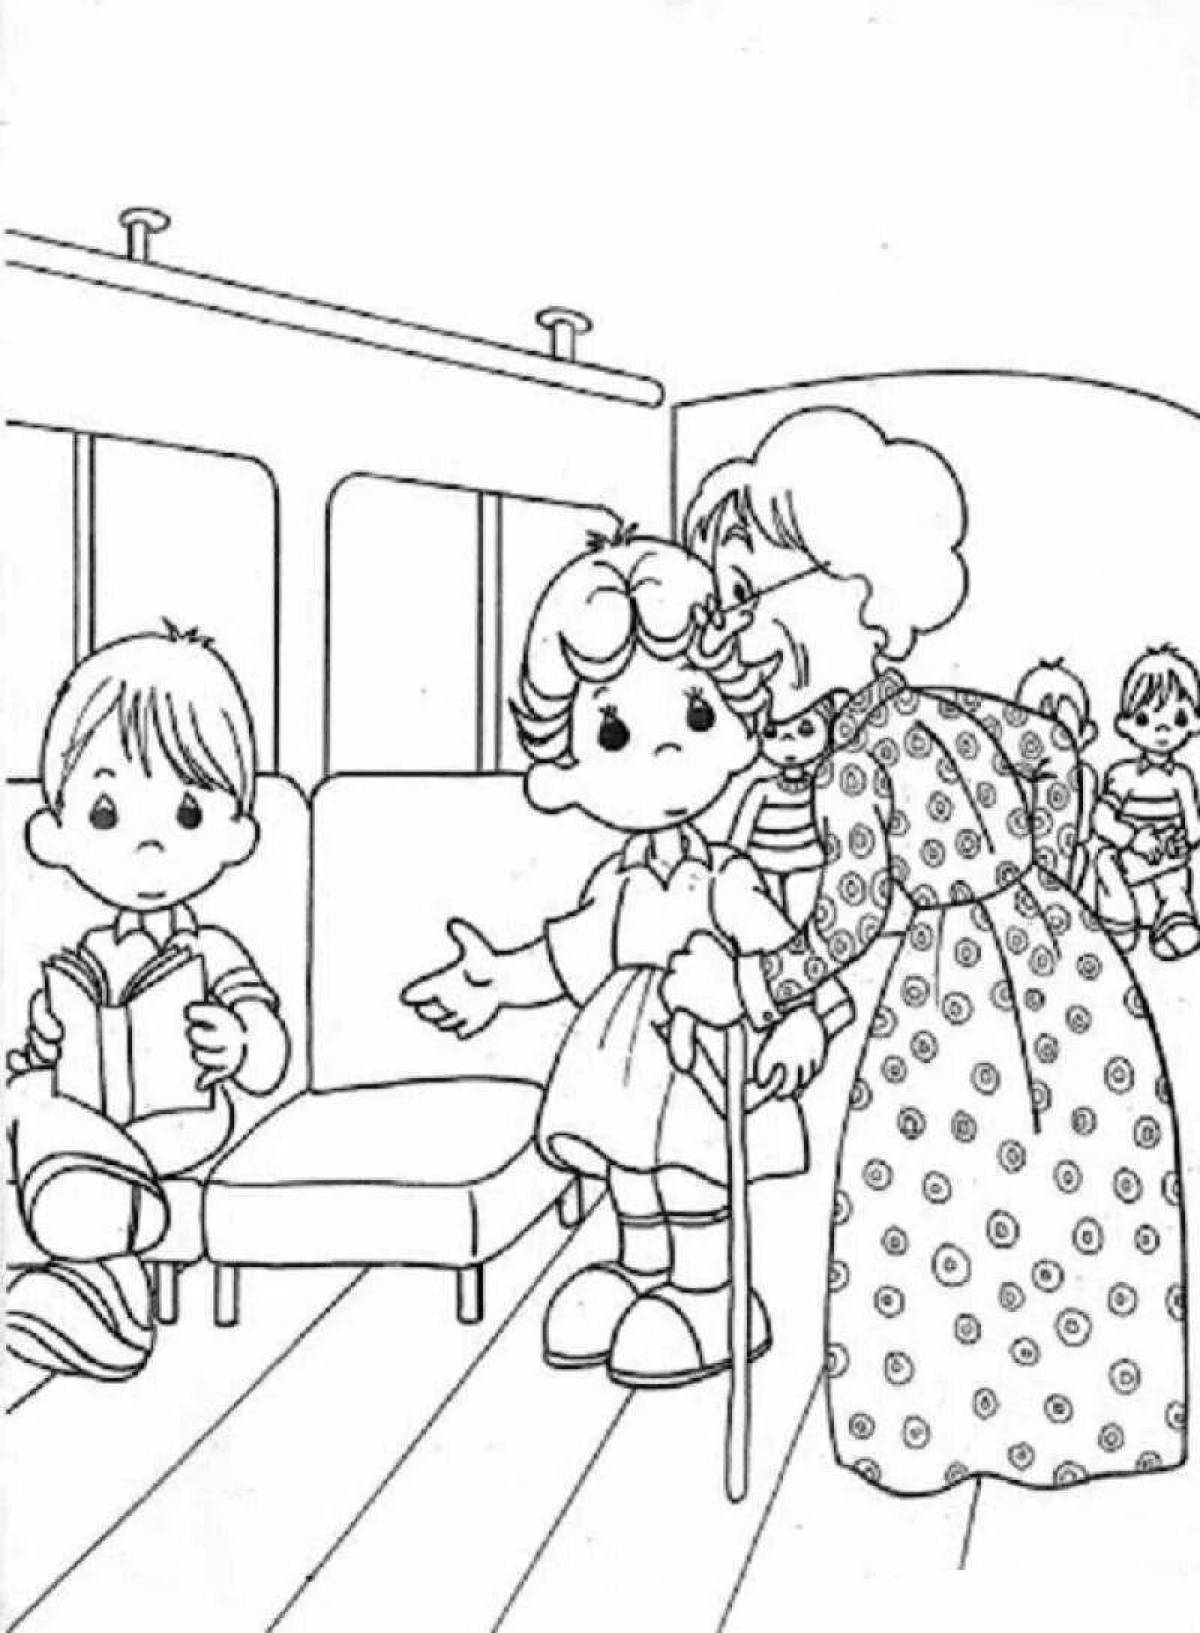 Exciting etiquette coloring book for 5-6 year olds